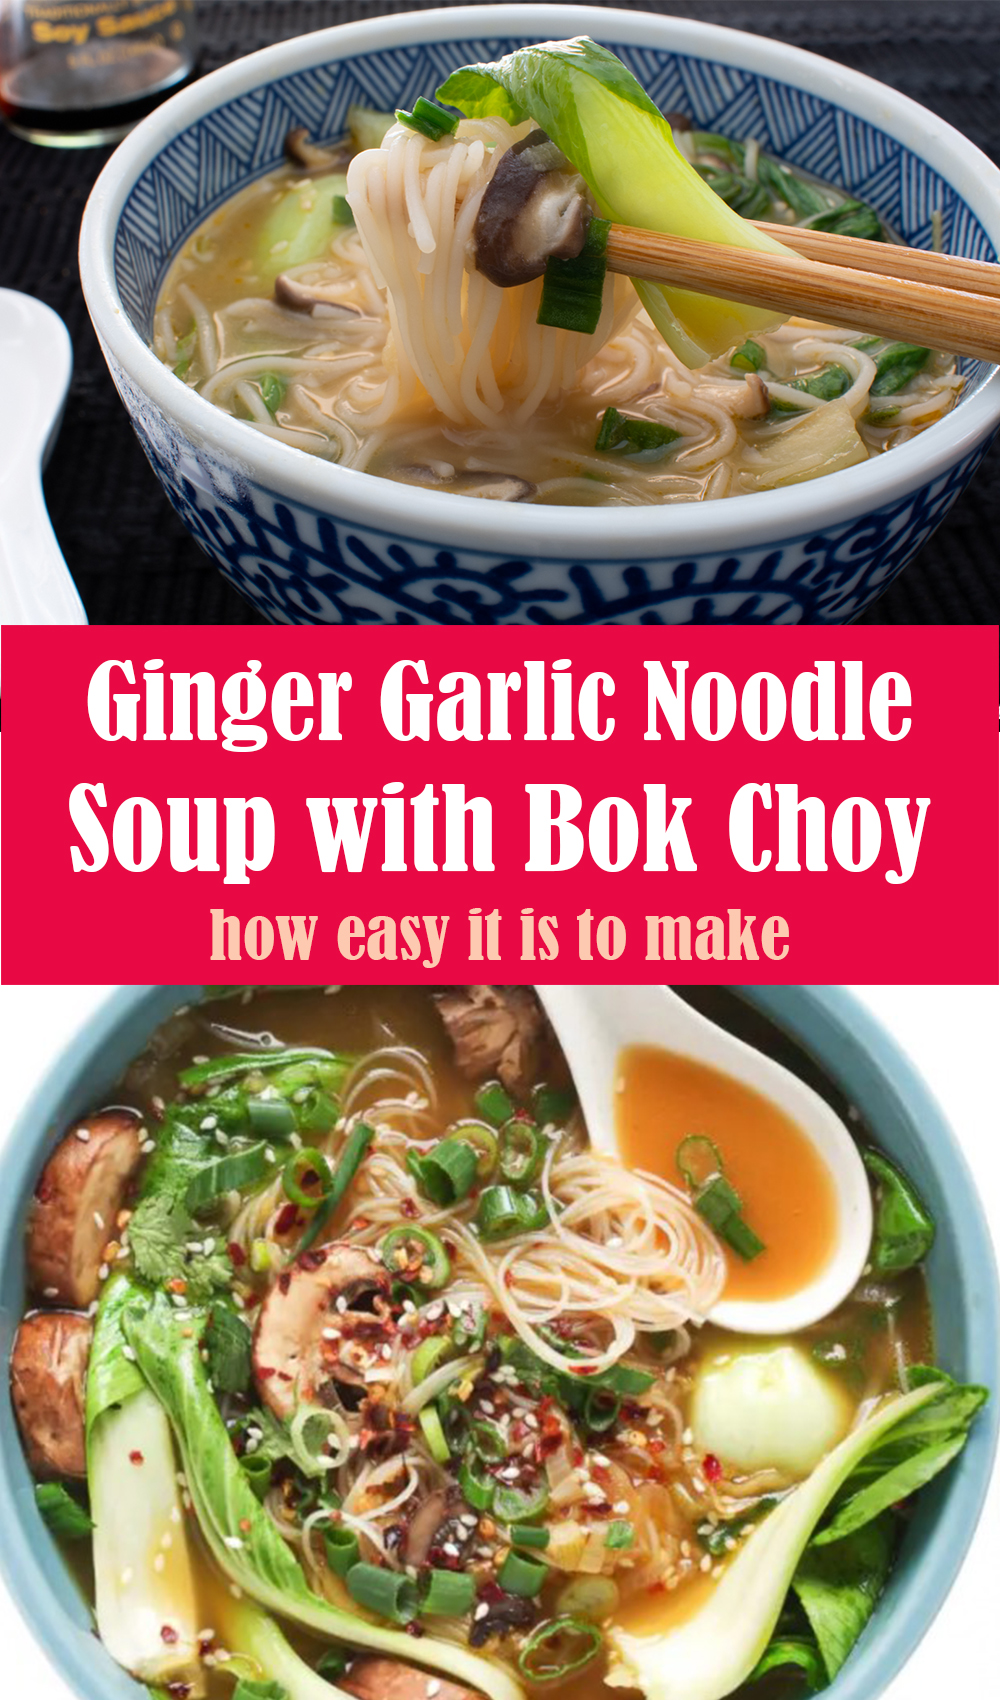 Ginger Garlic Noodle Soup with Bok Choy